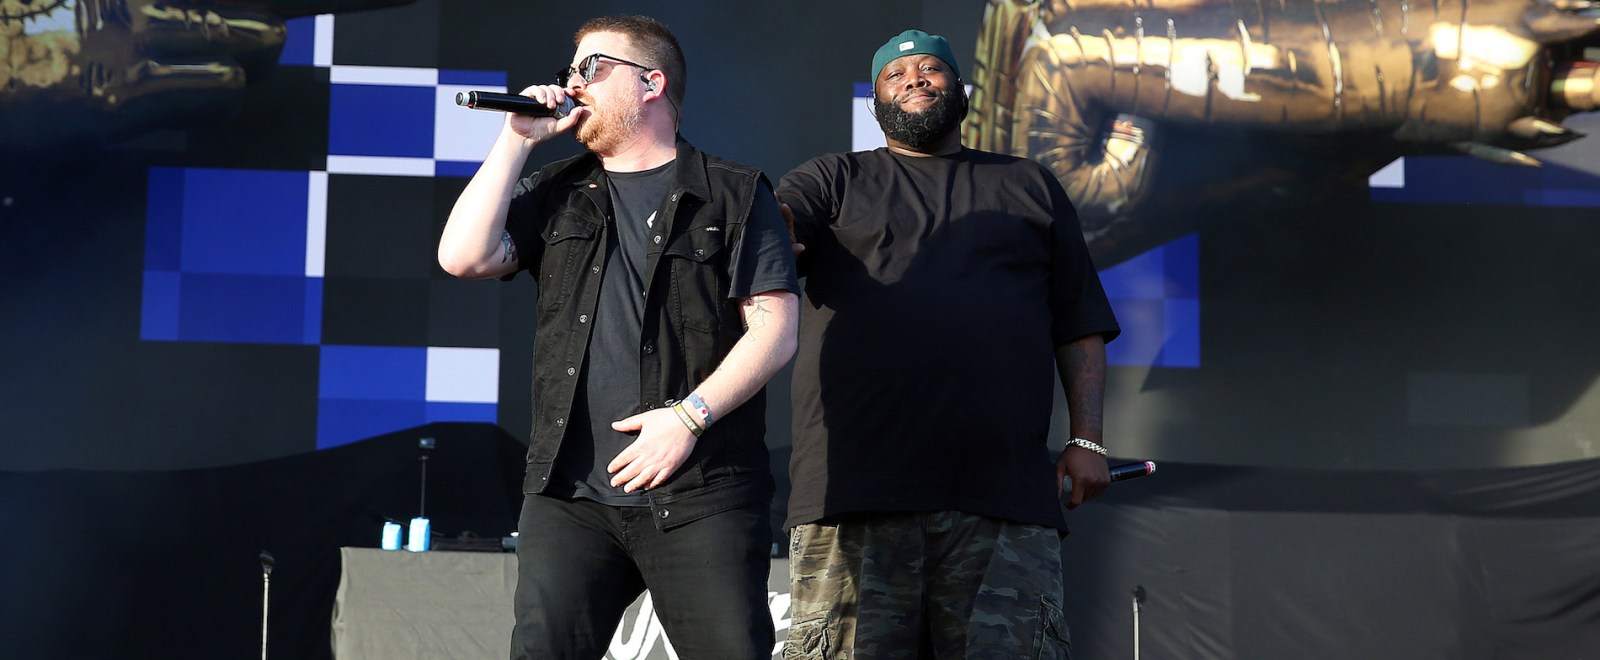 Run The Jewels Killer Mile El-P All Points East Festival 2019